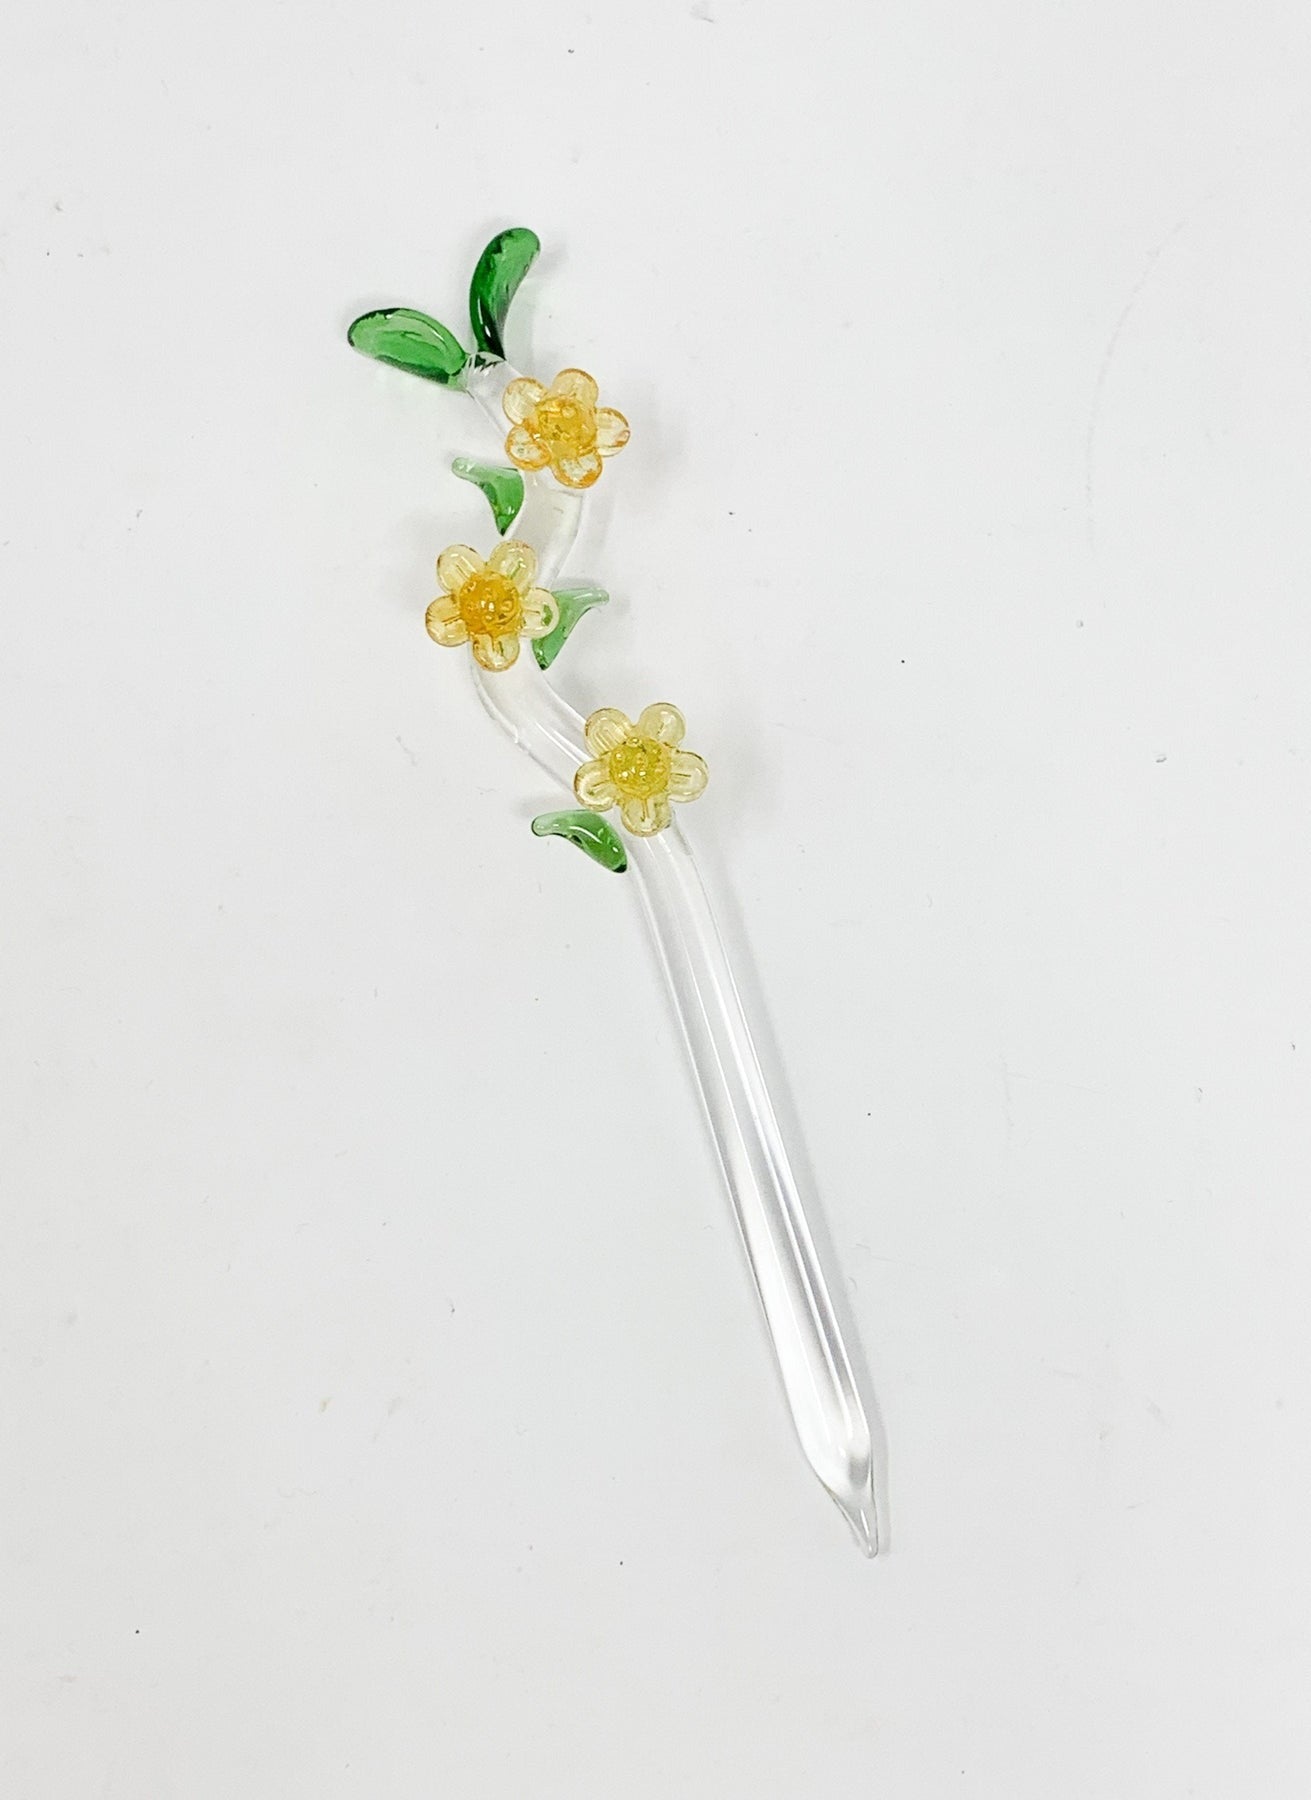 A delicate glass floral dab tool with green leaf and yellow flower adornments